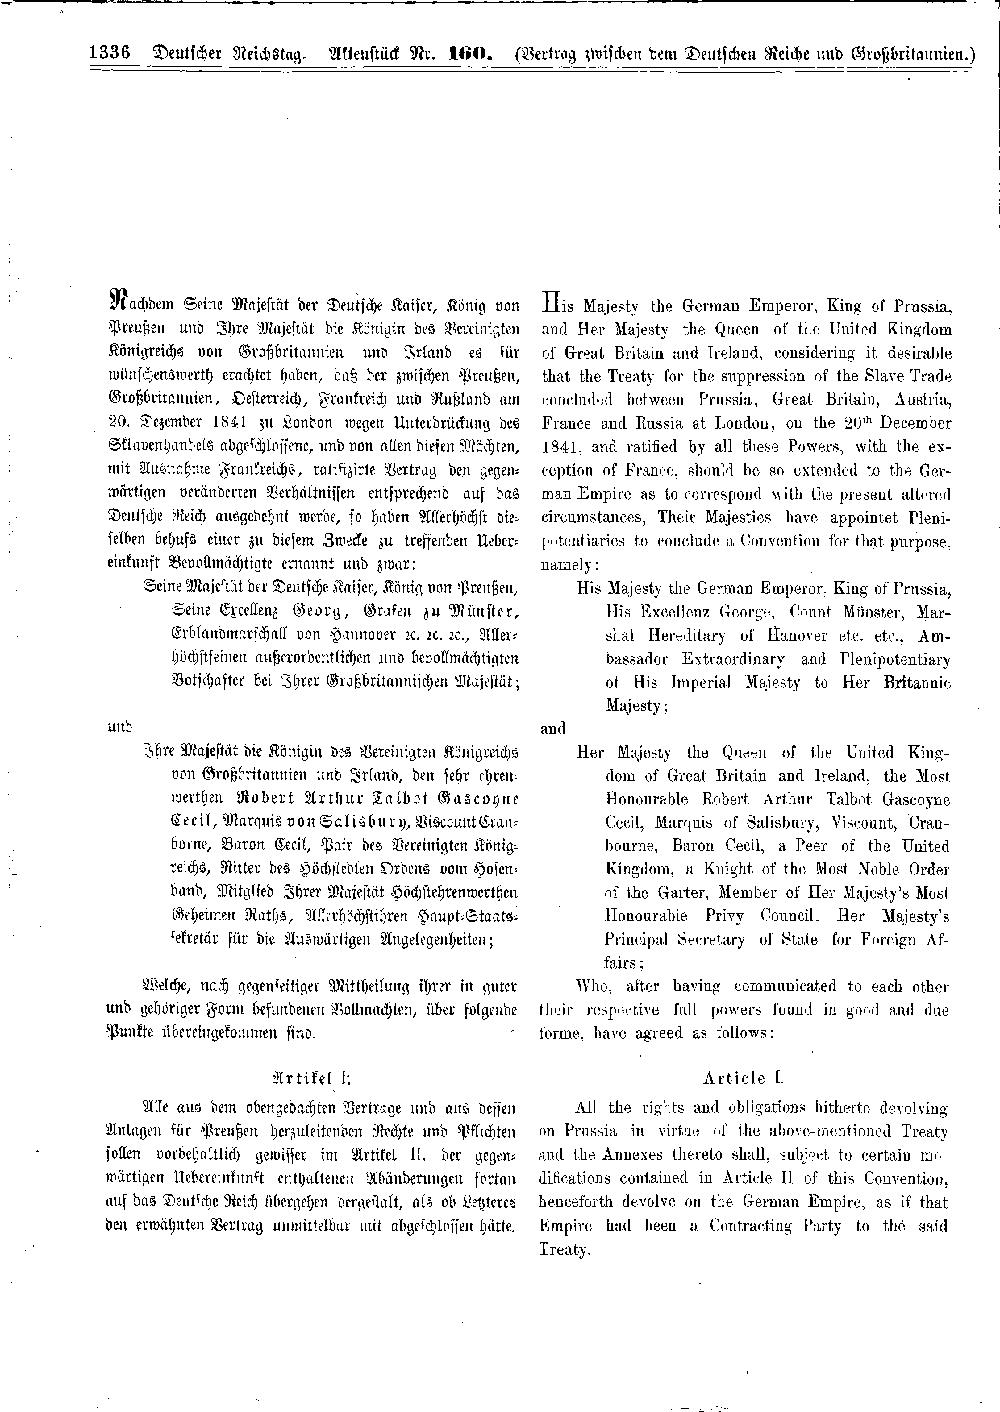 Scan of page 1336